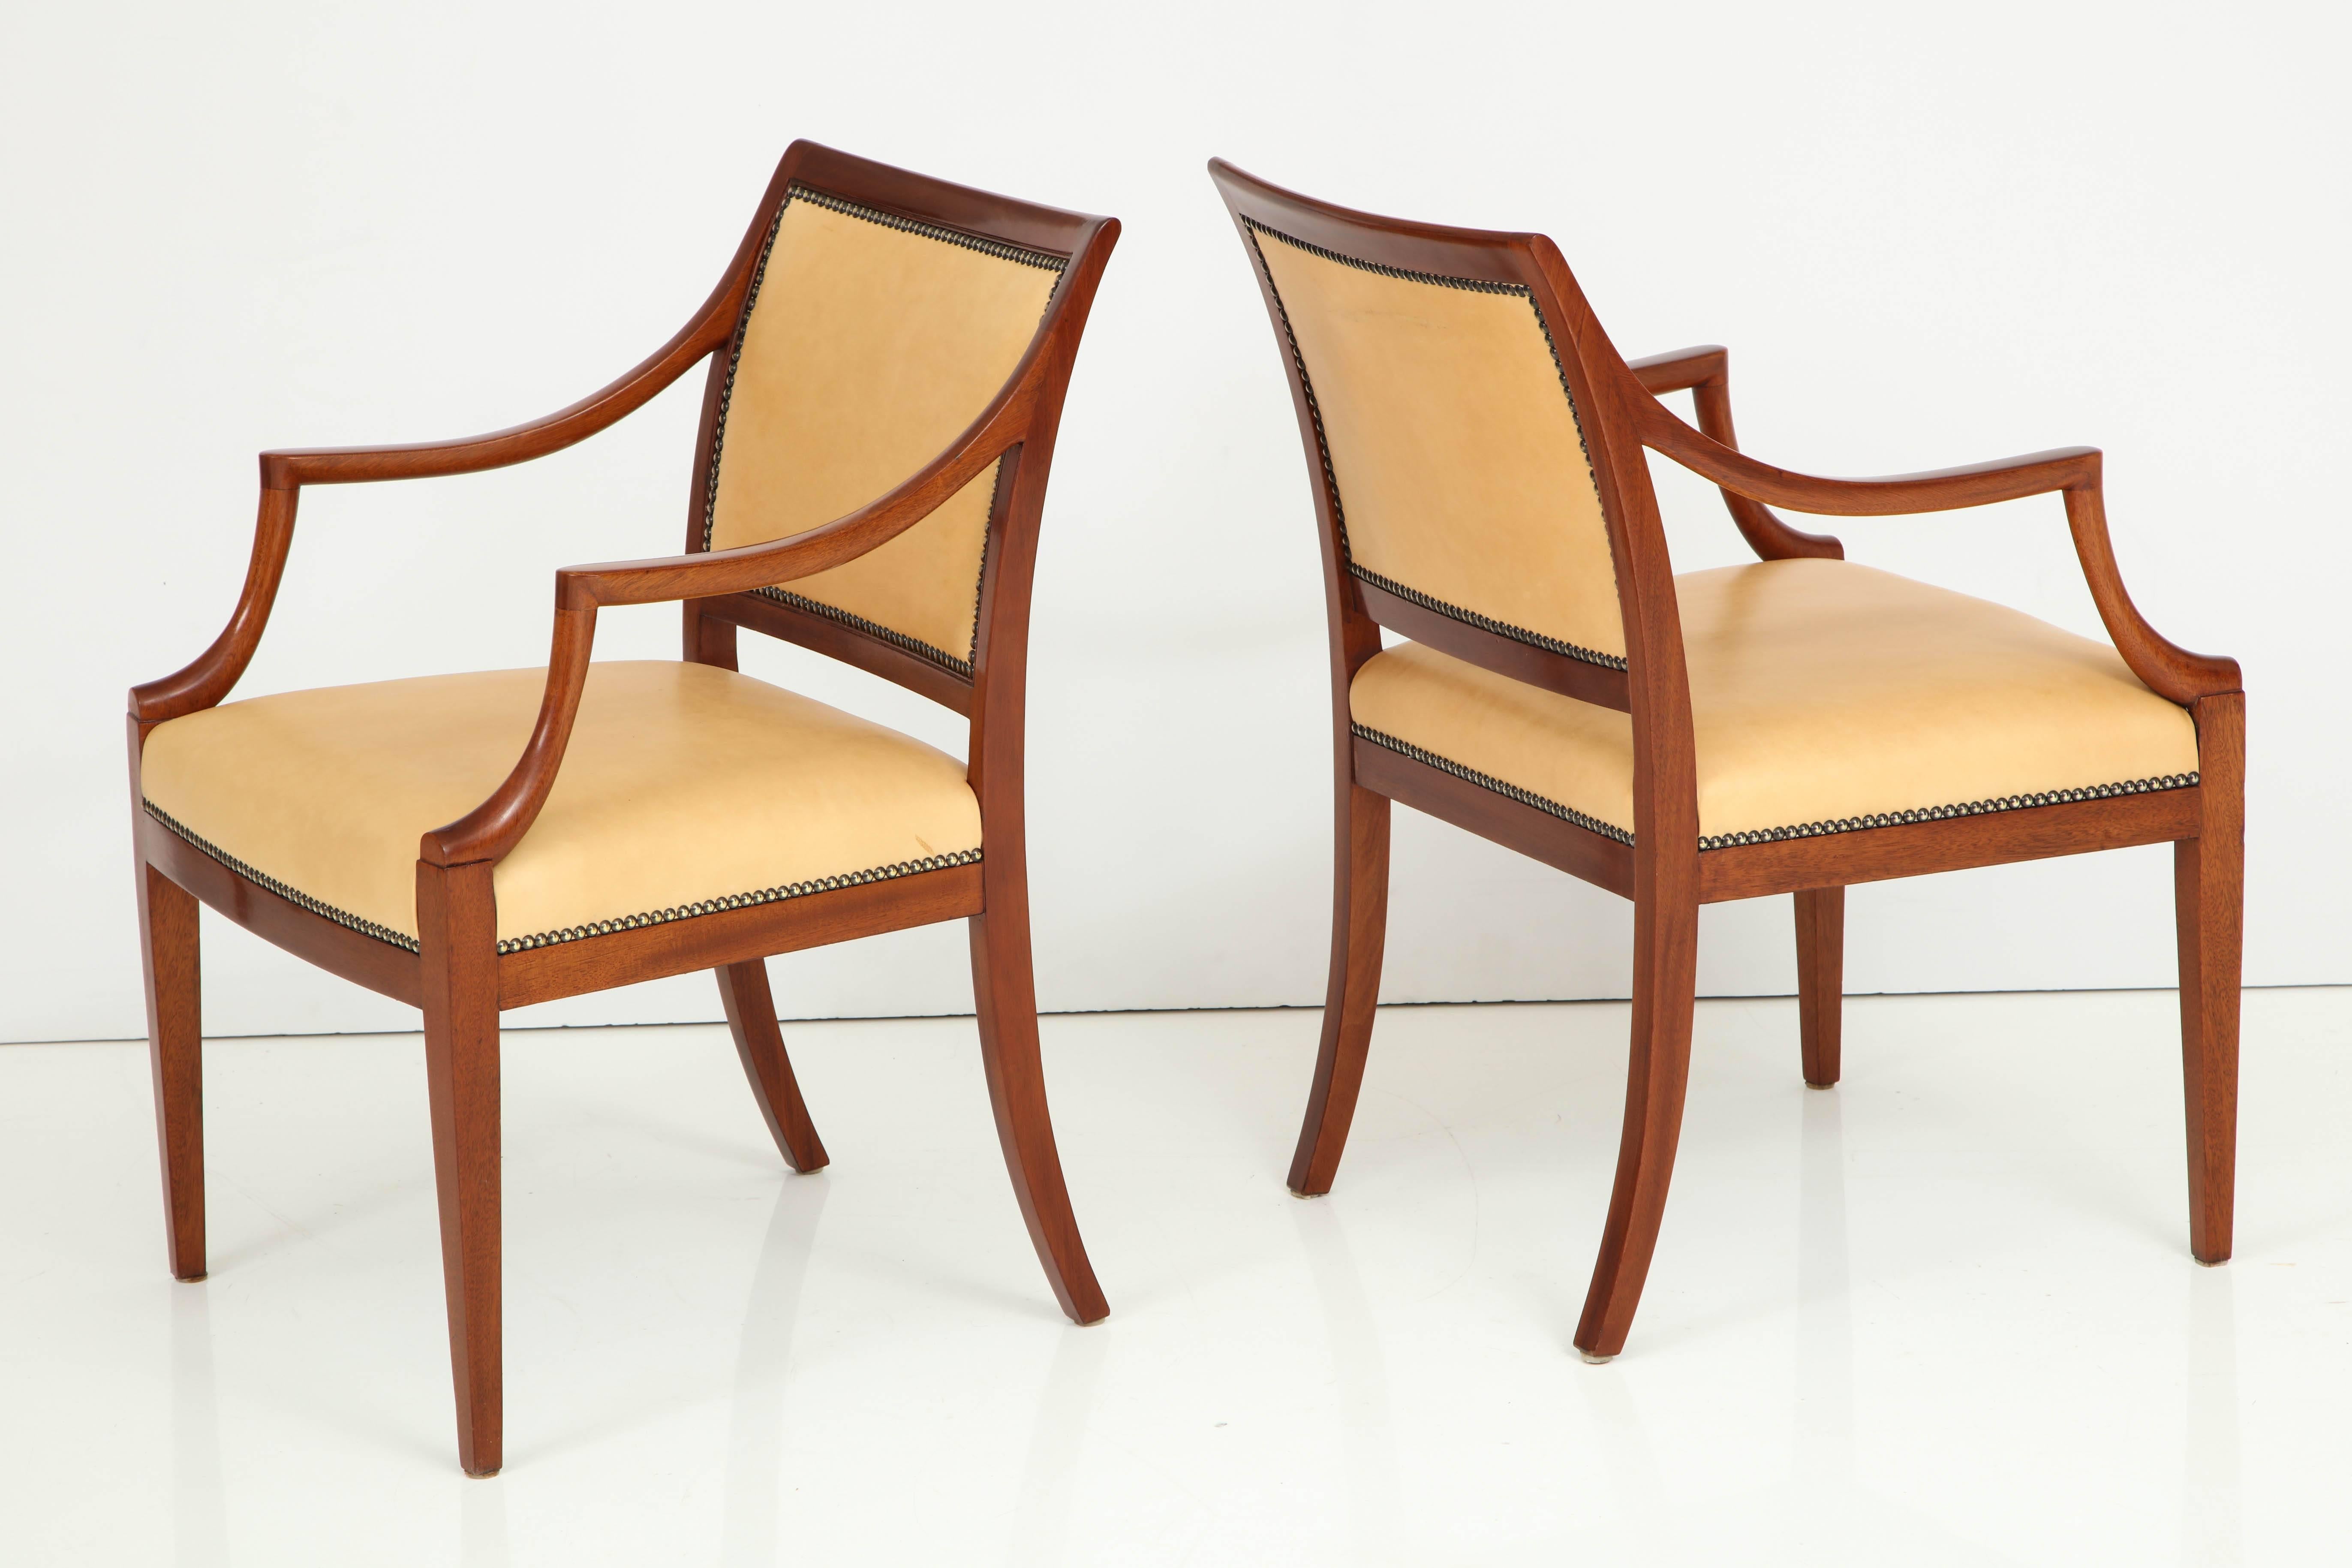 A pair of Danish mahogany open armchairs by Frits Henningsen with leather seat and back finished with French nailheads, circa 1940s, a rich mahogany frame with downswept armrests raised on square tapered legs. New leather upholstery.